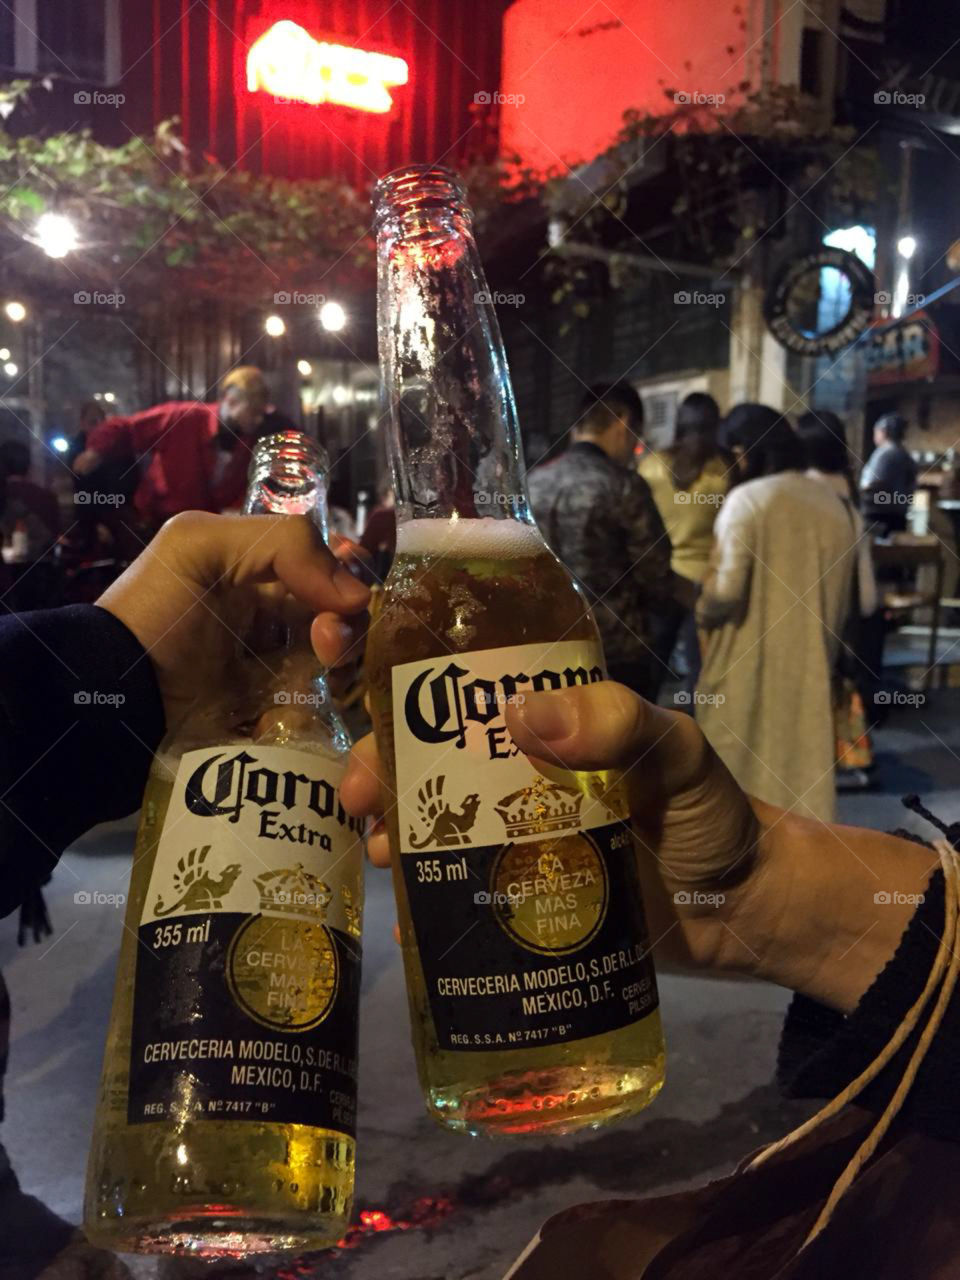 2 corona beers in a background of a nice bar, filled with lights and people